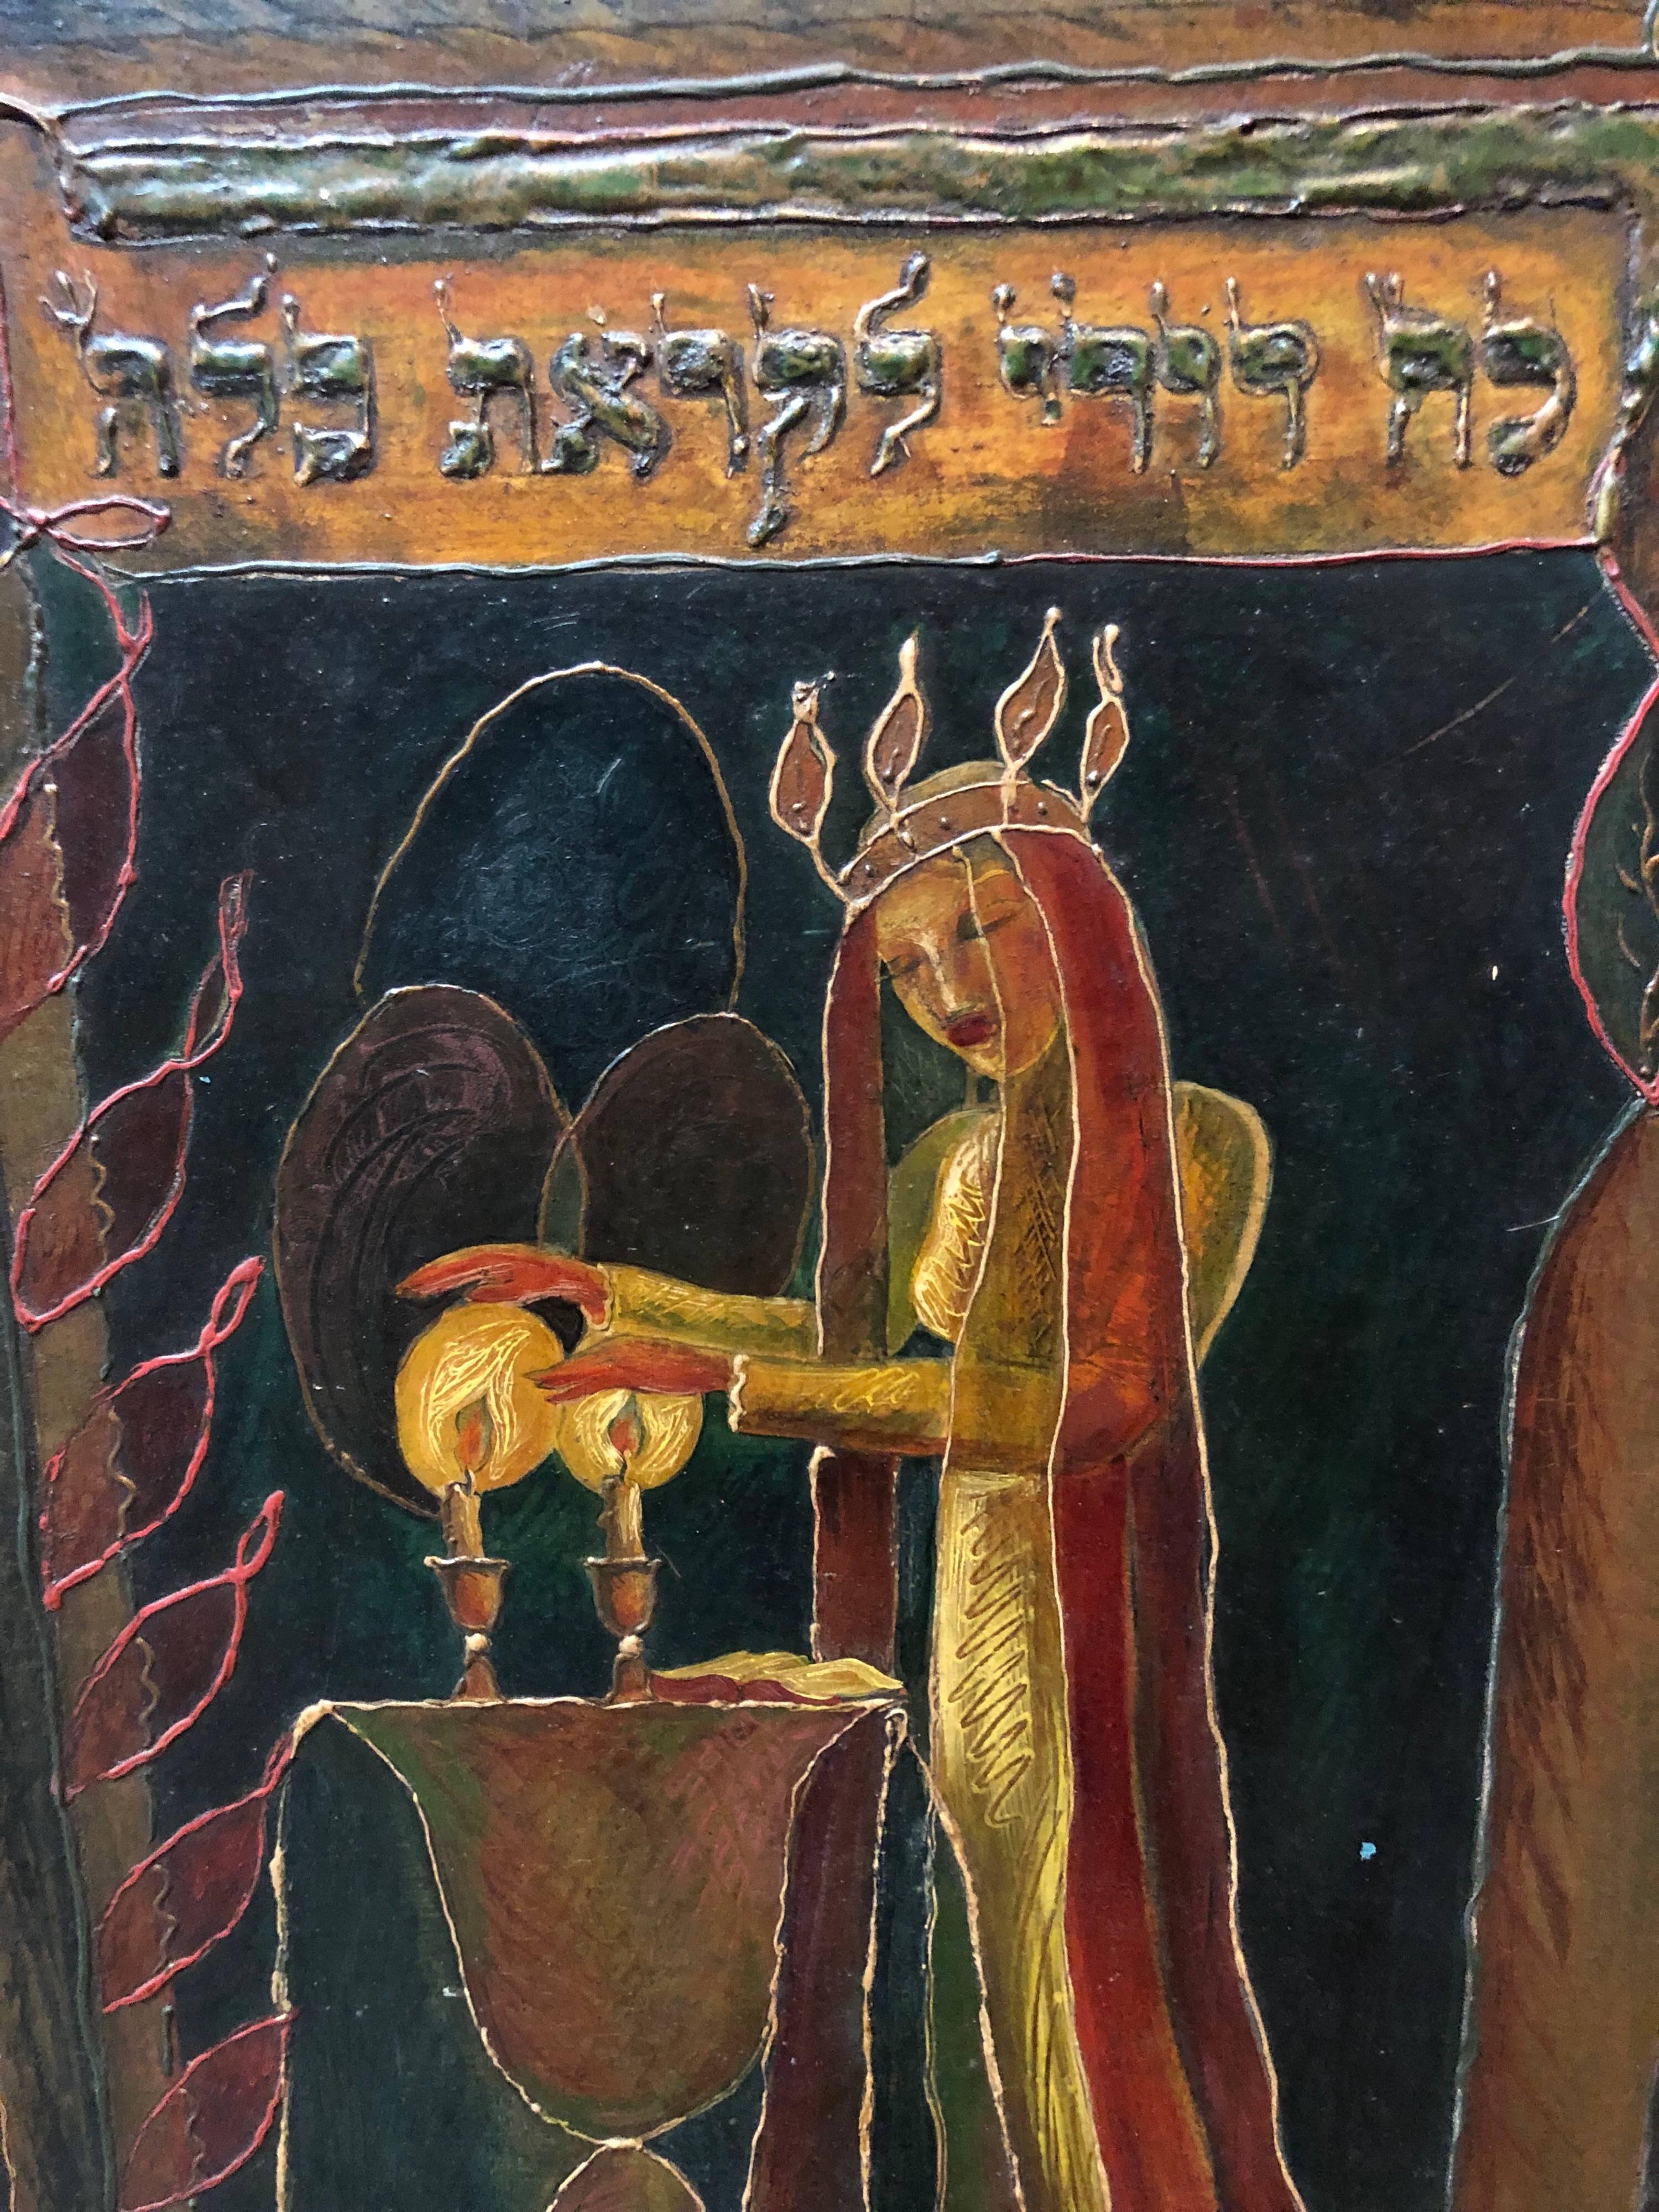 LECHA DODI Hebrew Shabbos prayer with text of the blessings.

Genre: Modern
Subject: Abstract
Medium: Mixed Media
Surface: Board


Alexander Raymond Katz, Hungarian / American (1895 – 1974)

Alexander Raymond Katz was born in Kassa, Hungary, and